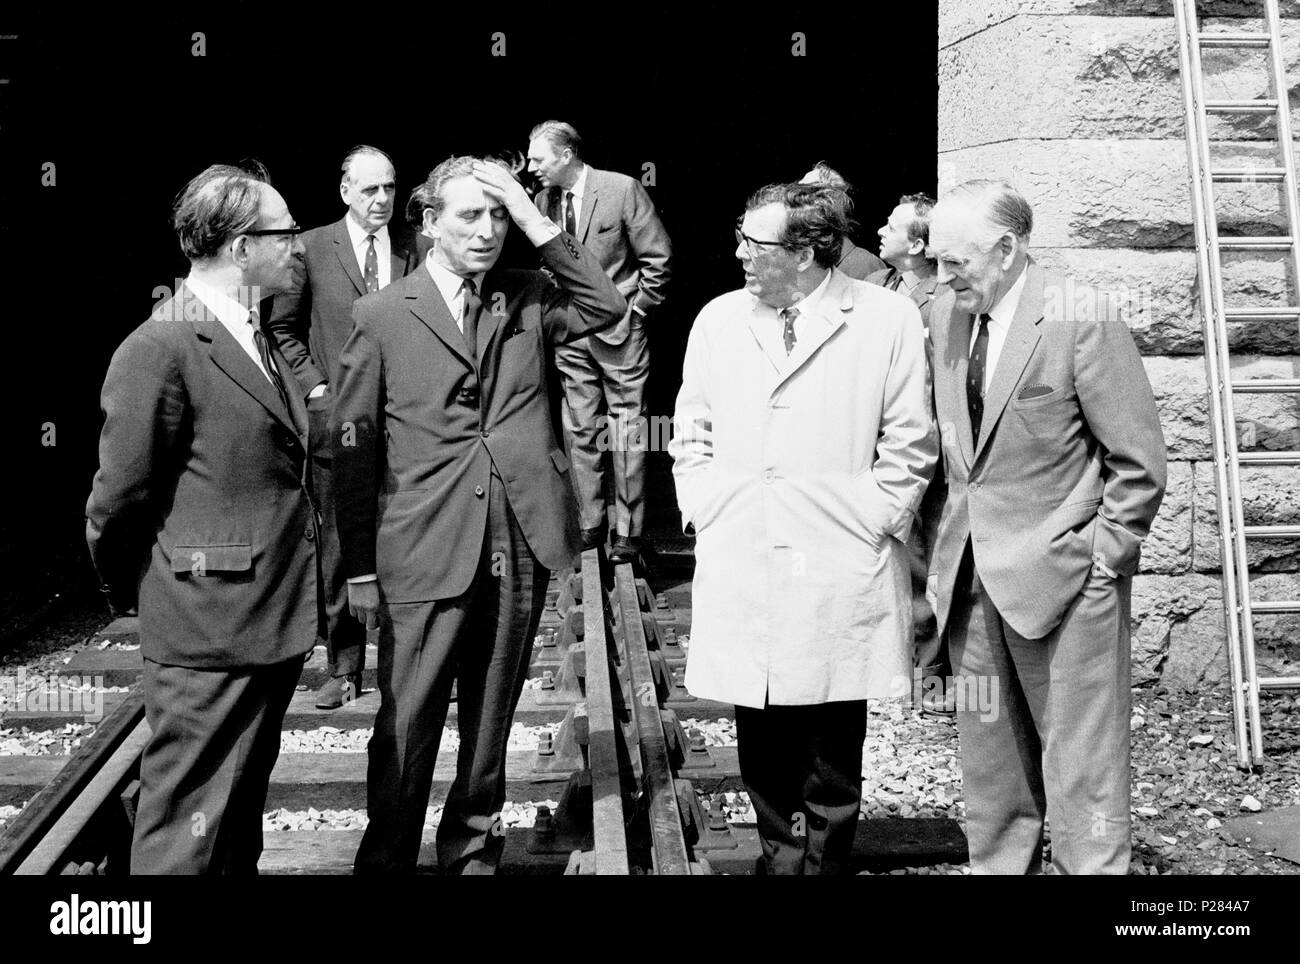 George Thomas, Secretary for Wales, puts his hand to his face while inspecting the fire-damaged tubular Britannia Bridge over the Menai Straight. Alongside Mr Thomas are (l-r) Fred Mulley, Minister of Transport, Cledwyn Hughes, Minister of agriculture, and Sir Henry Johnson, Chairman of the Railway Board. Stock Photo